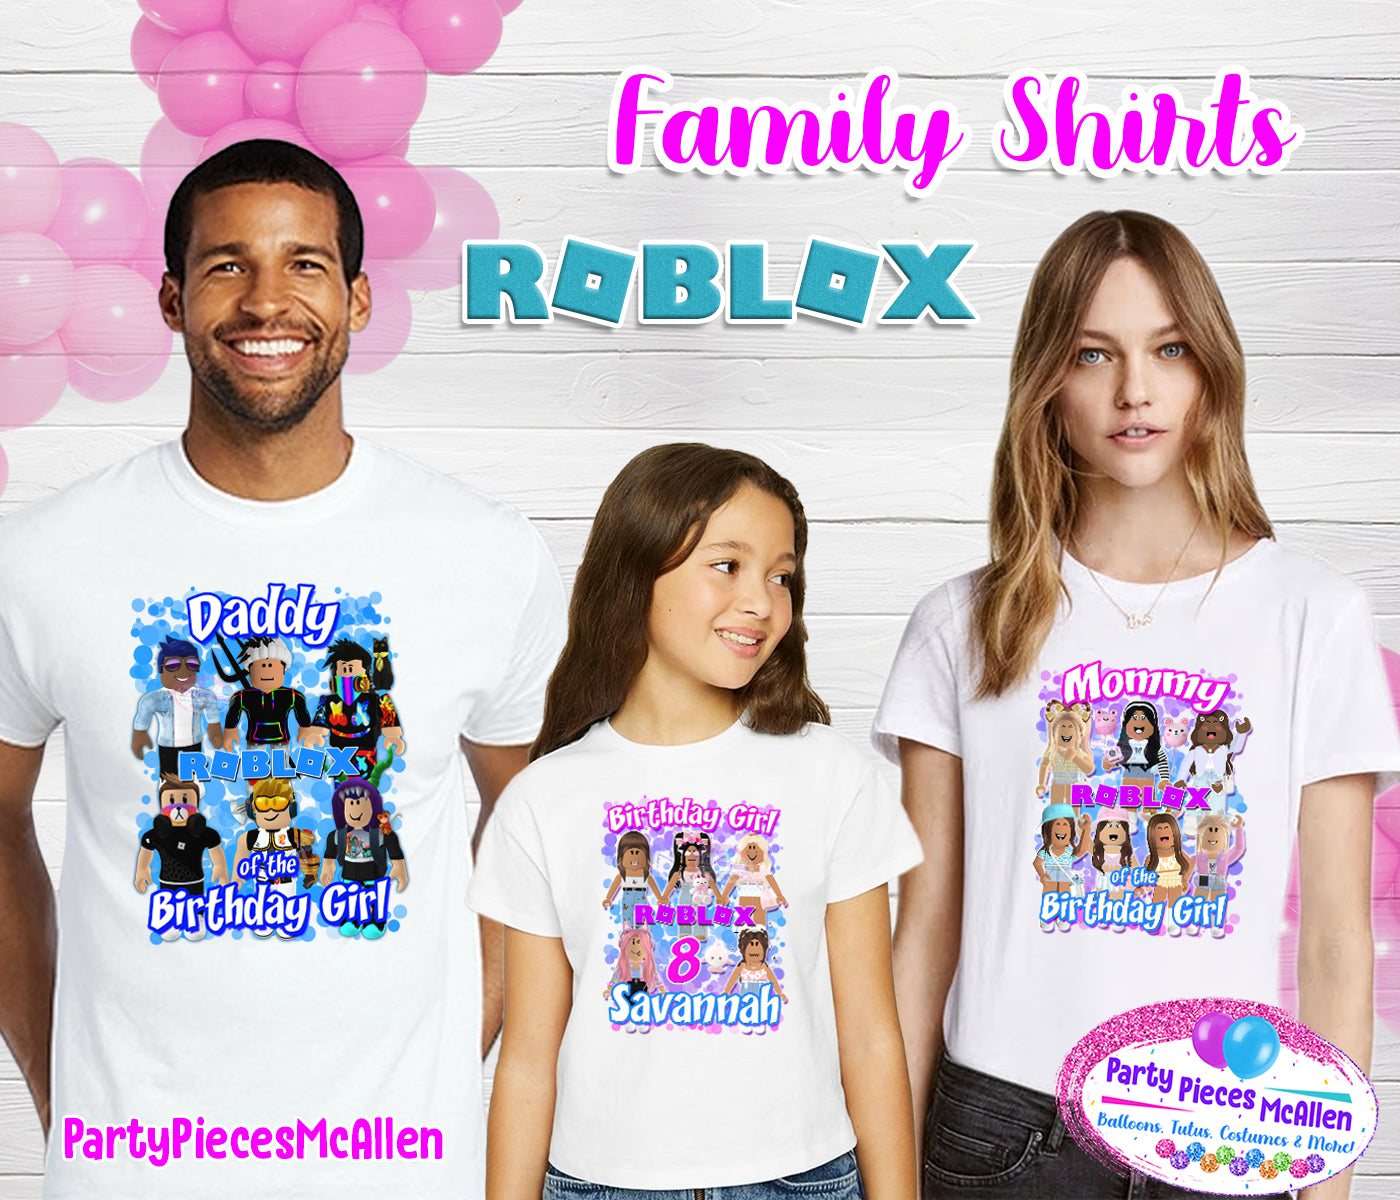 Roblox Face 15 Boy Character T-Shirt, Children Costume Shirts, Kids Outfit  ~